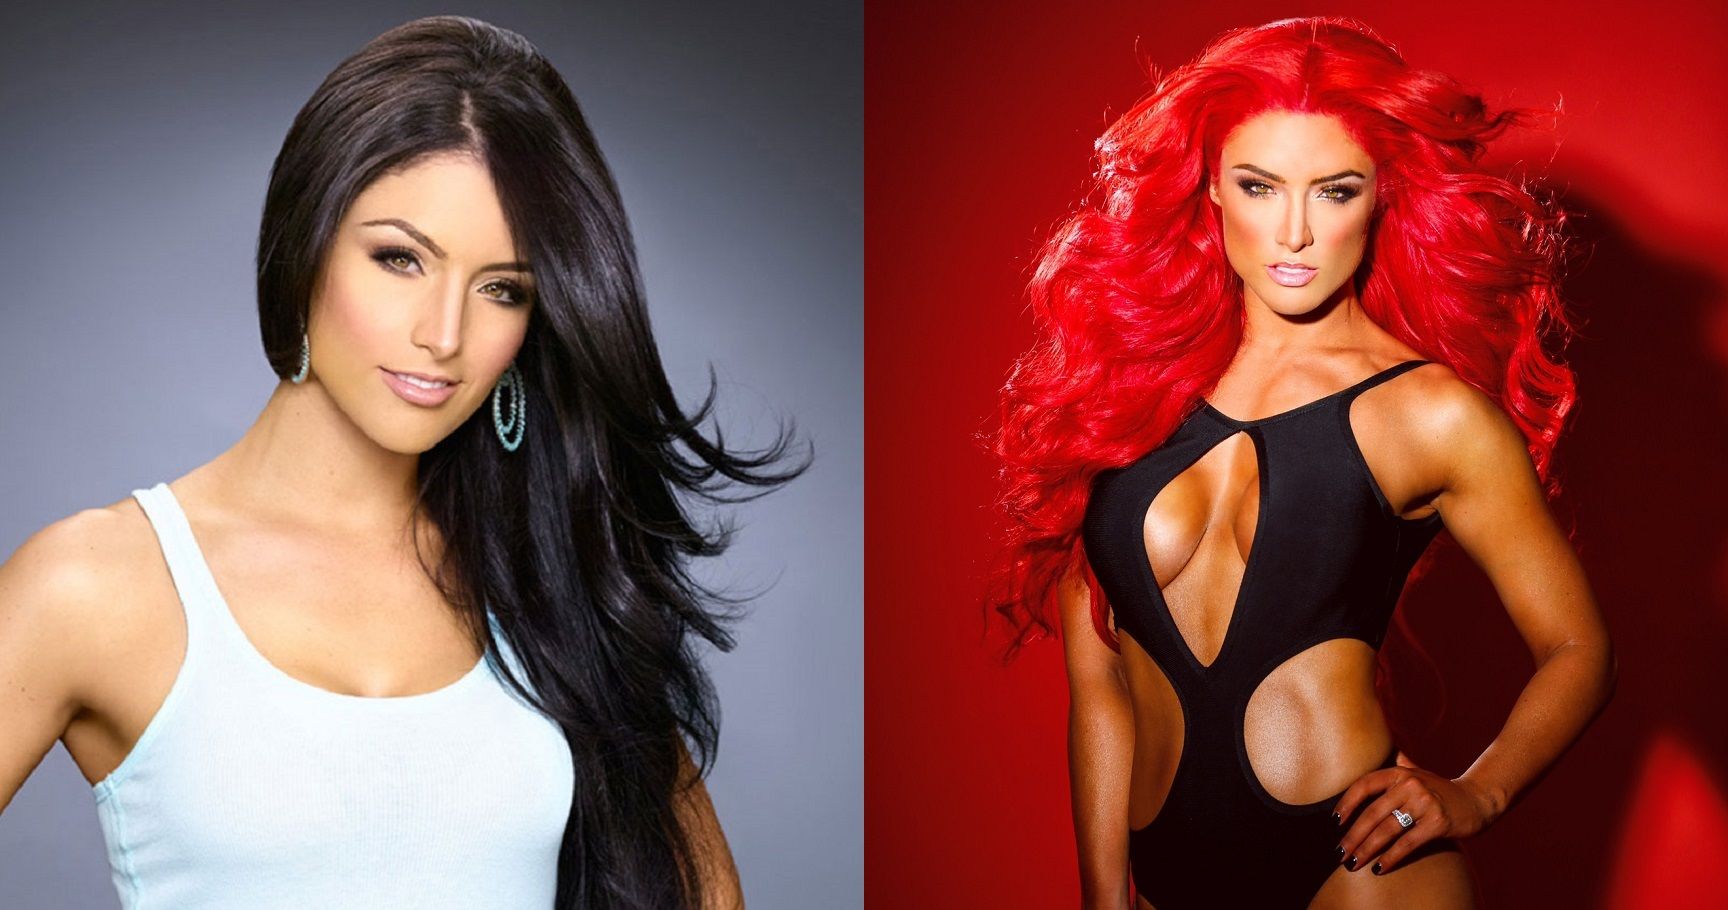 Top 15 WWE Divas Who Drastically Changed Their Appearance